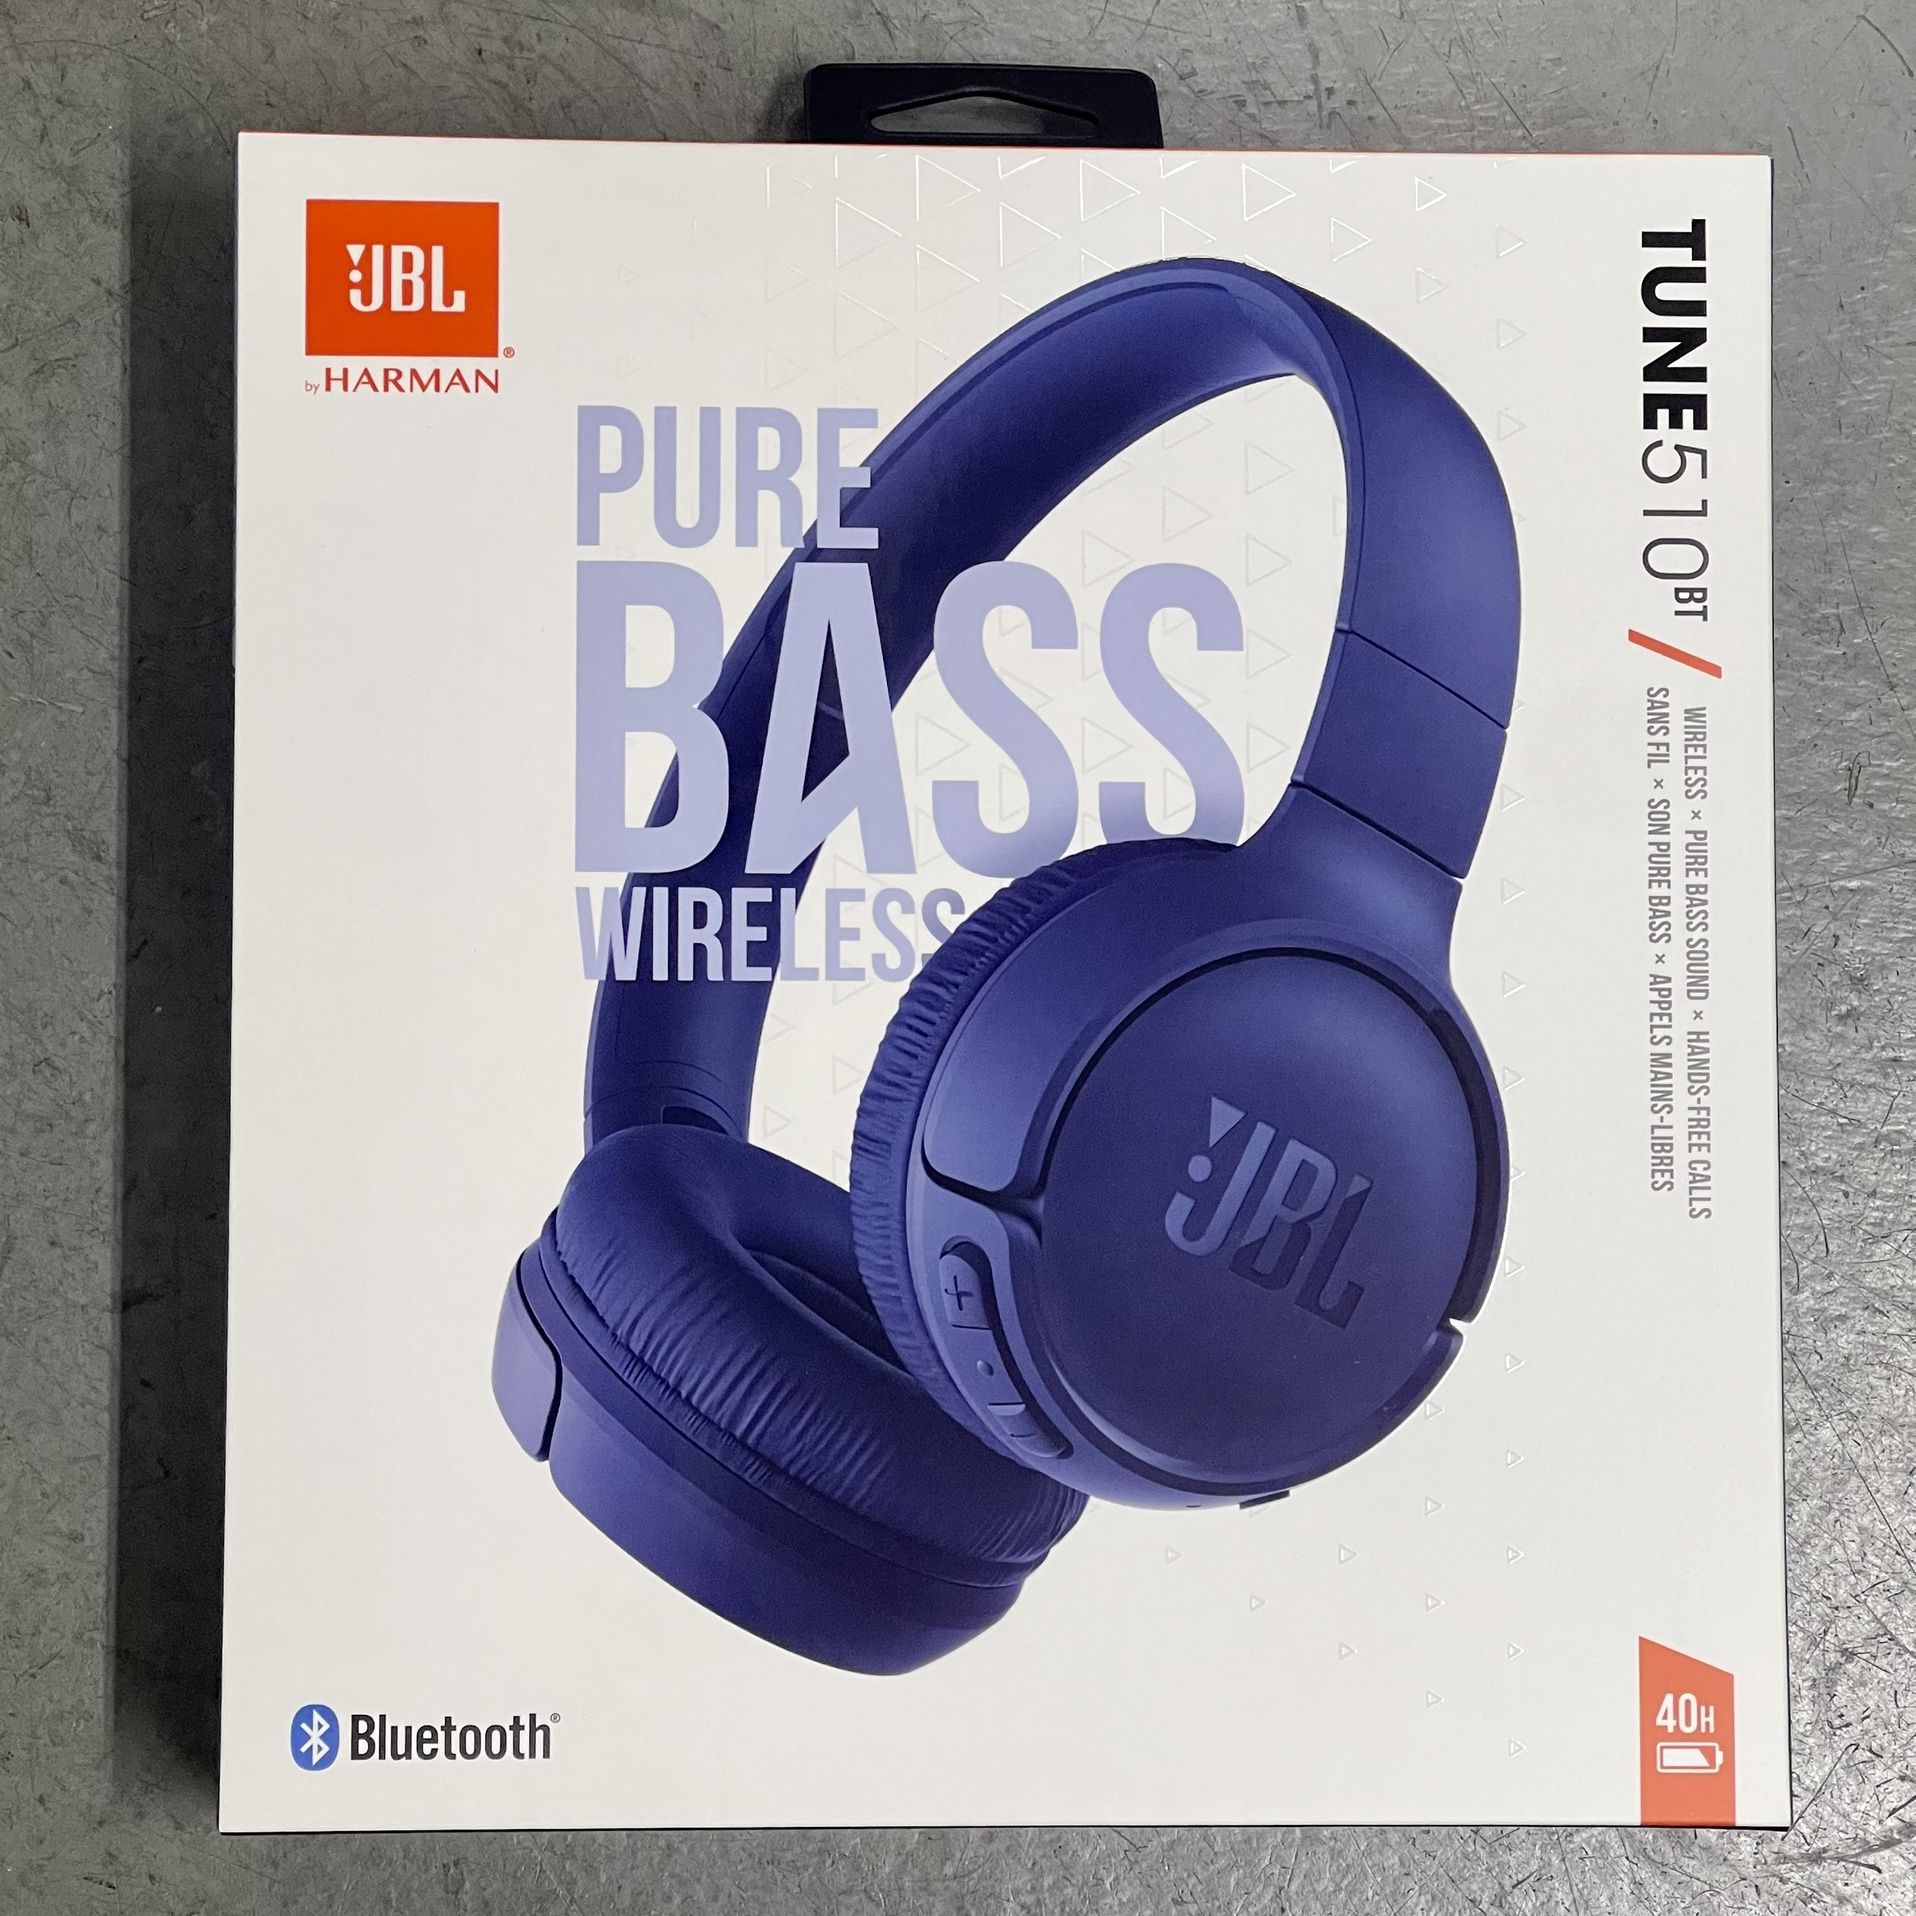 JBL Tune 510 BT. Bluetooth Over Ear Headphones. Hands free calls. foldable. Up to 40 hours of battery. Pure Bass. Blue, black white and pink available